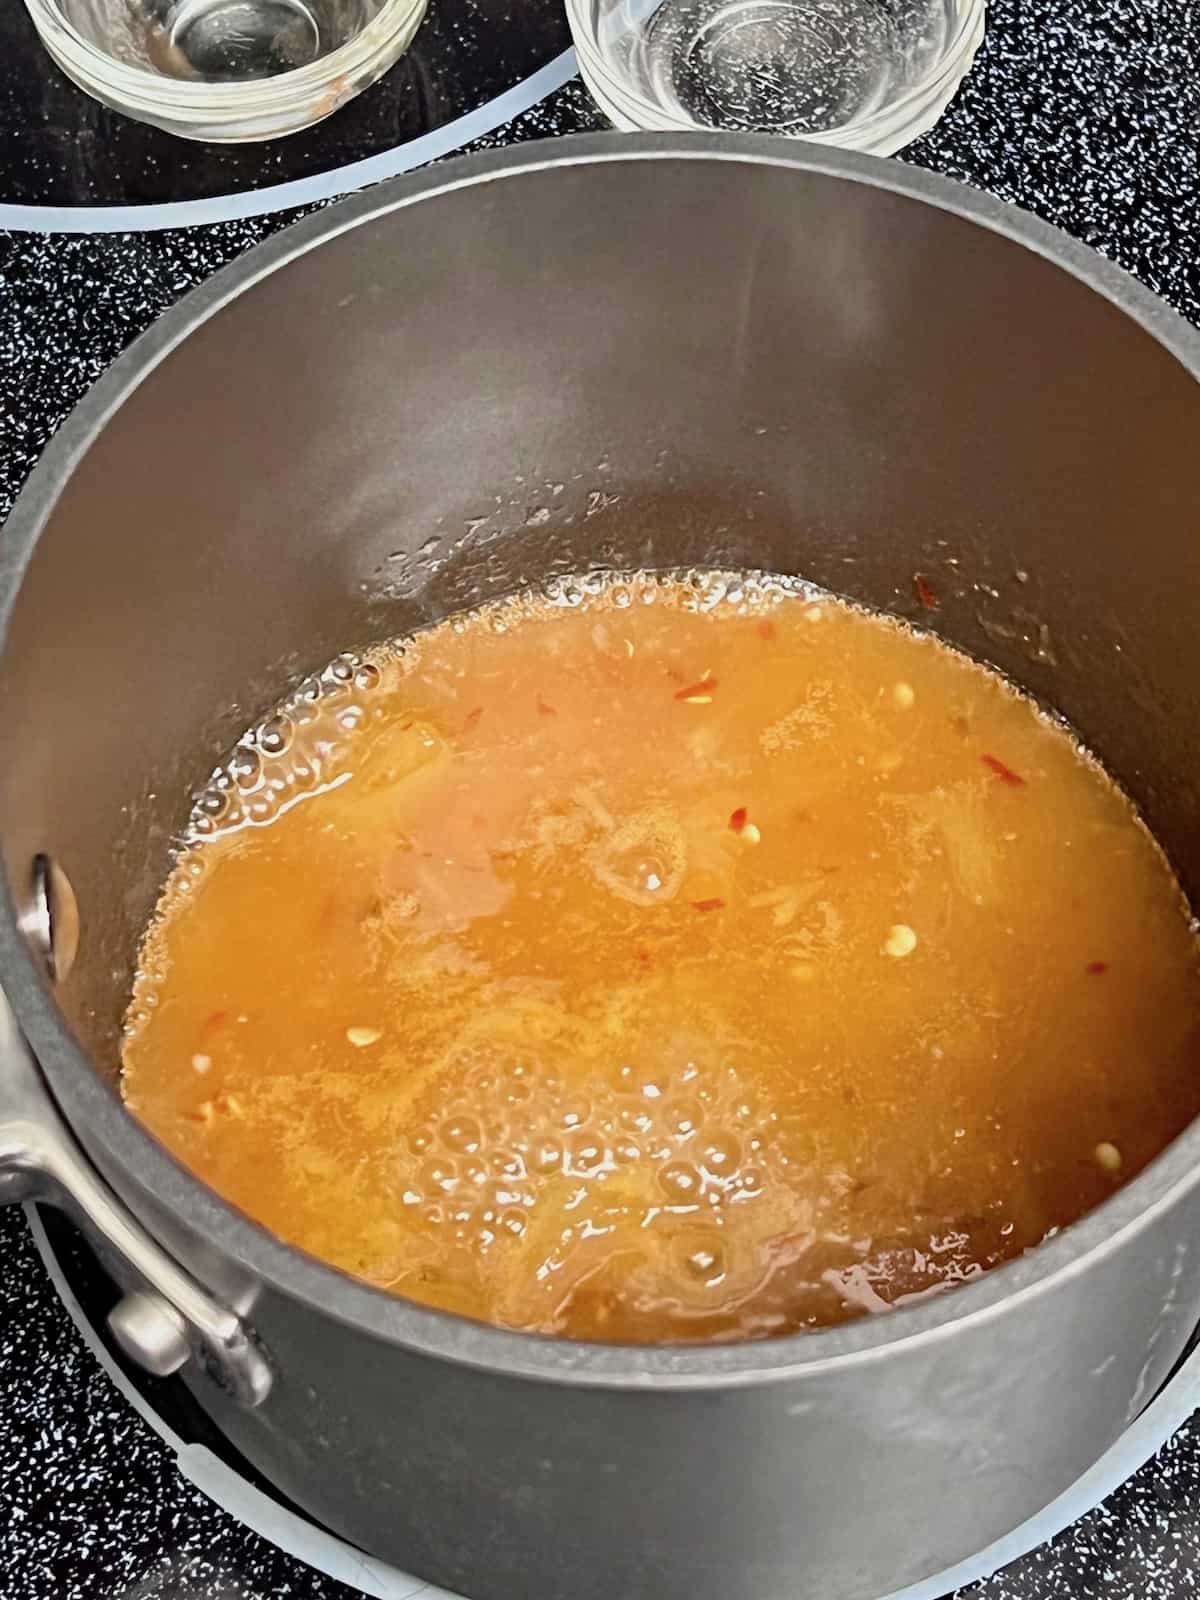 Pineapple Dipping Sauce for Coconut Shrimp bubbling in a pot.